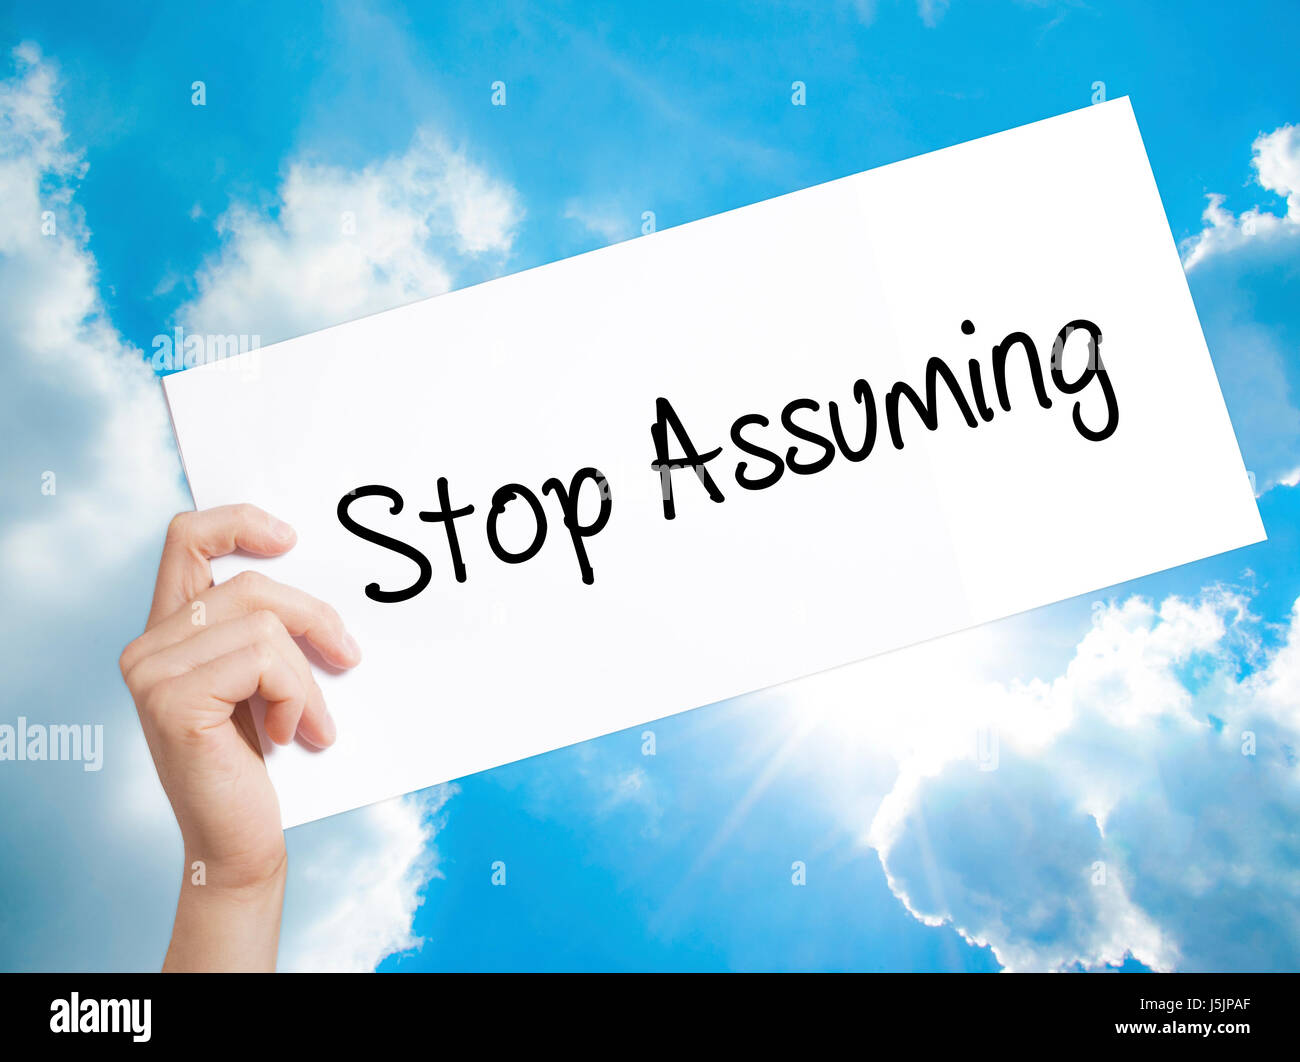 Stop Assuming Sign on white paper. Man Hand Holding Paper with text. Isolated on sky background.  Business concept. Stock Photo Stock Photo